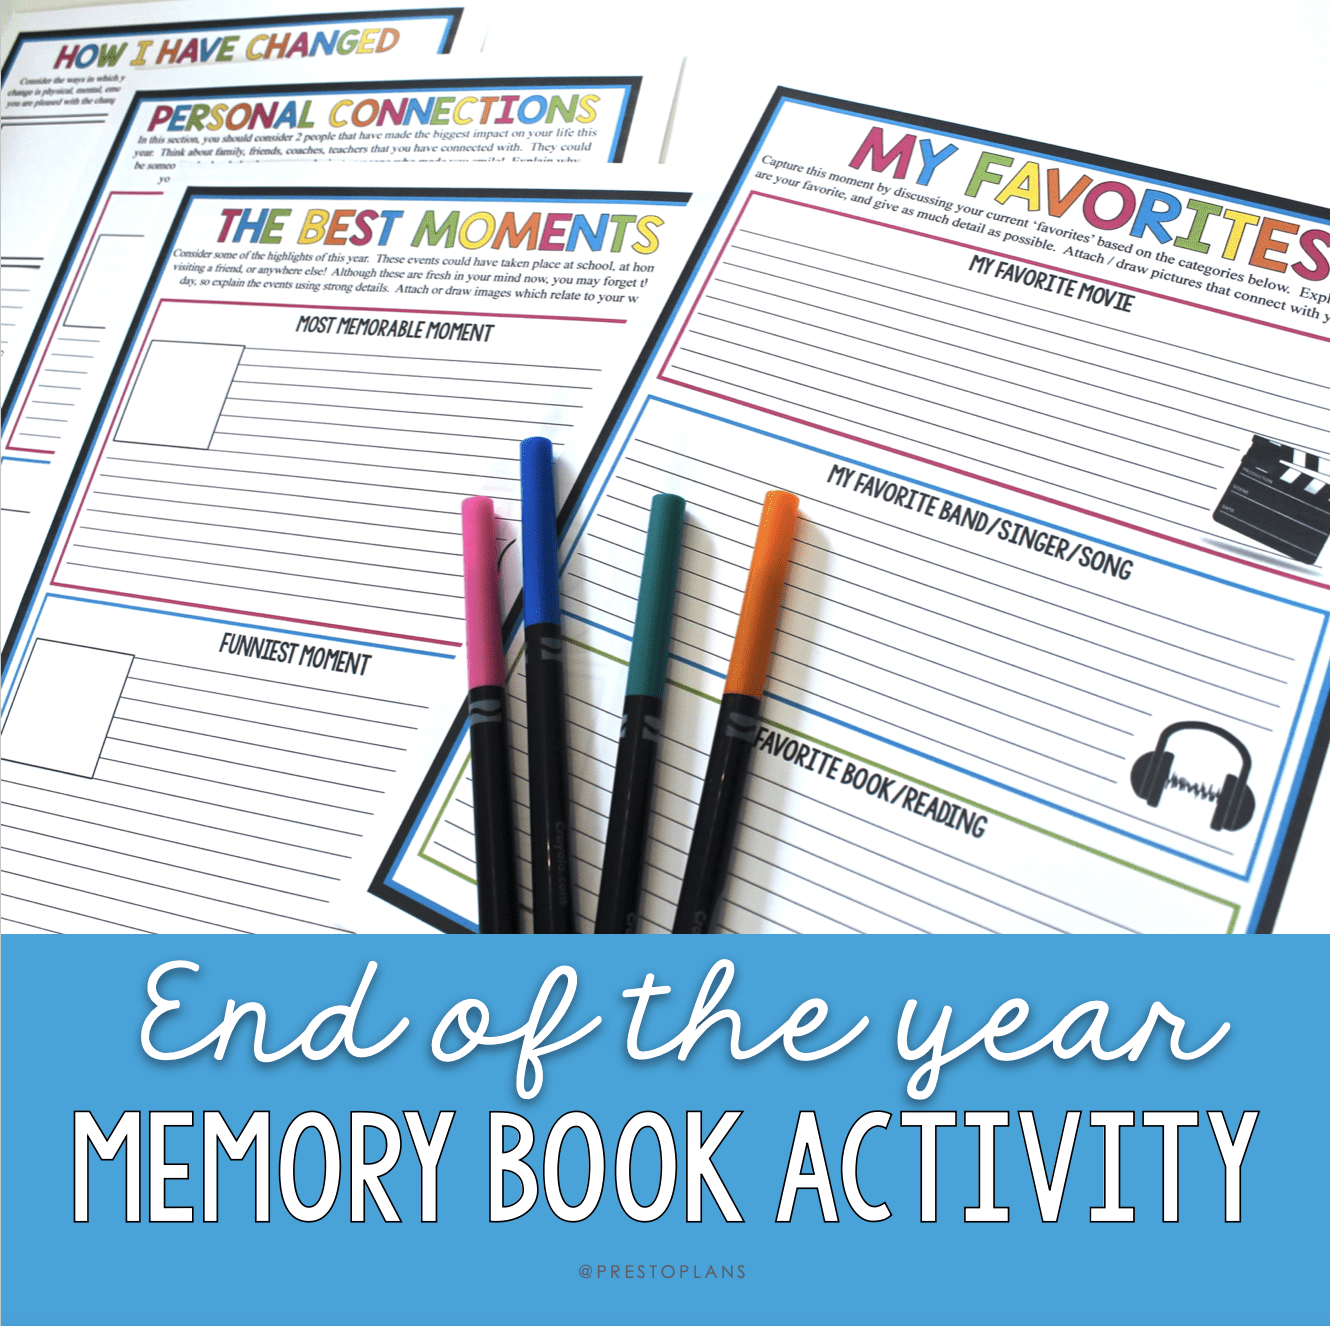 Create a memorable keepsake with the End of the Year Memory Book activity.